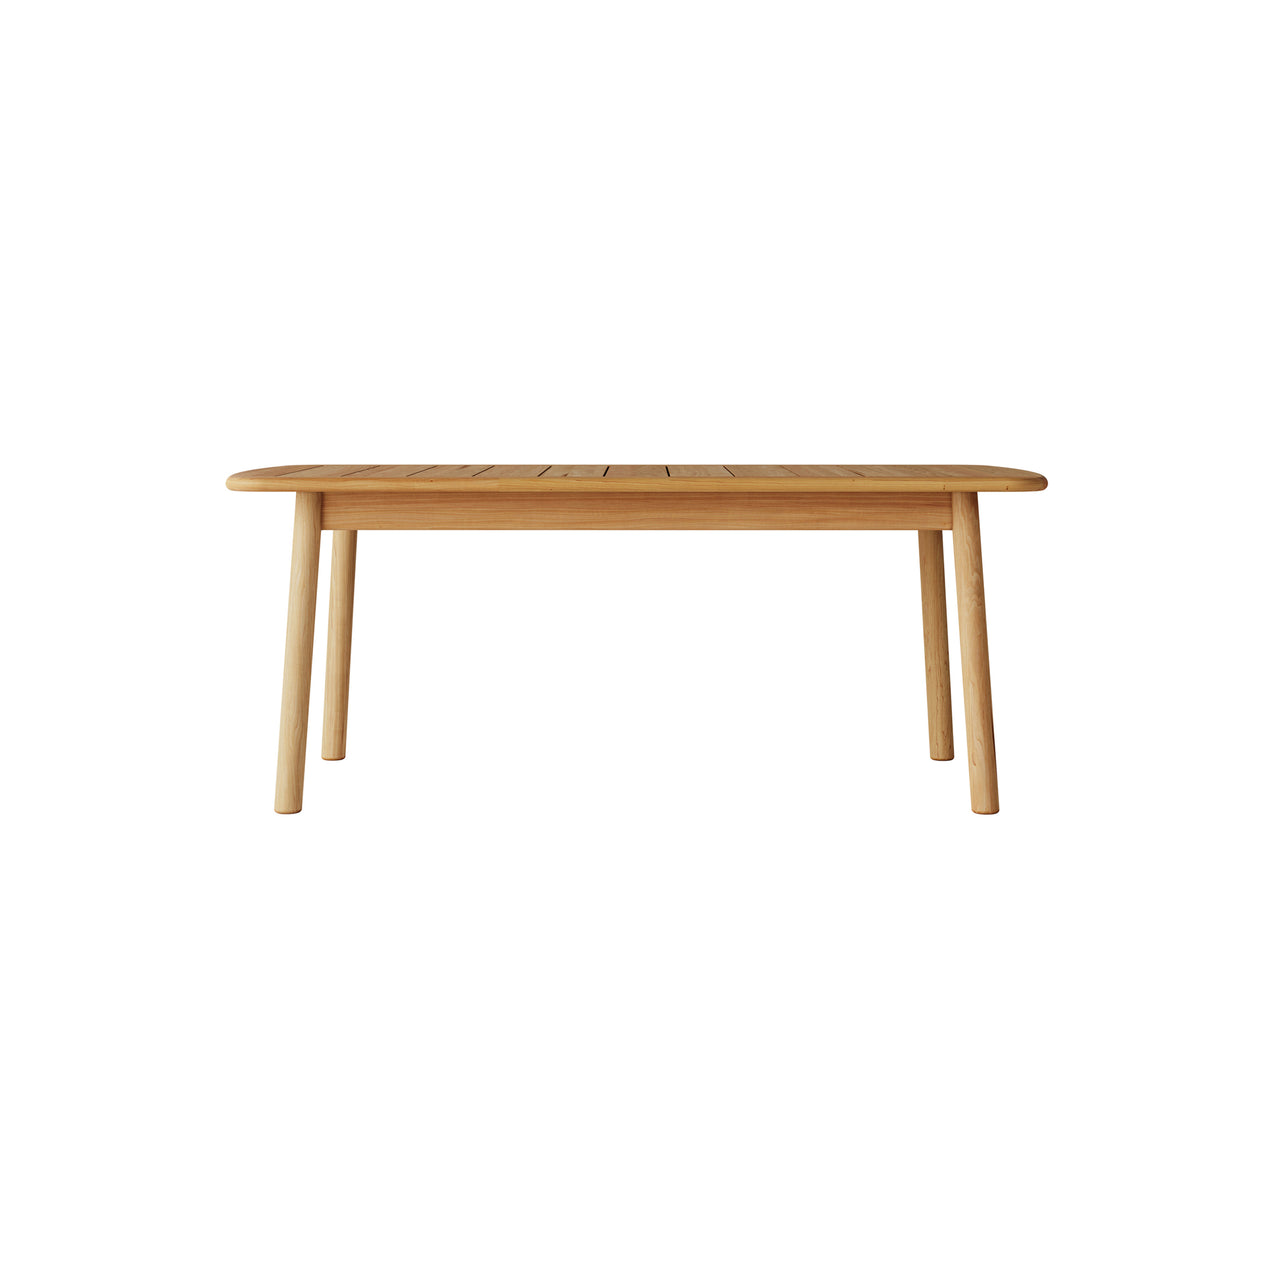 Tanso Rectangular Table: Small - 72.5